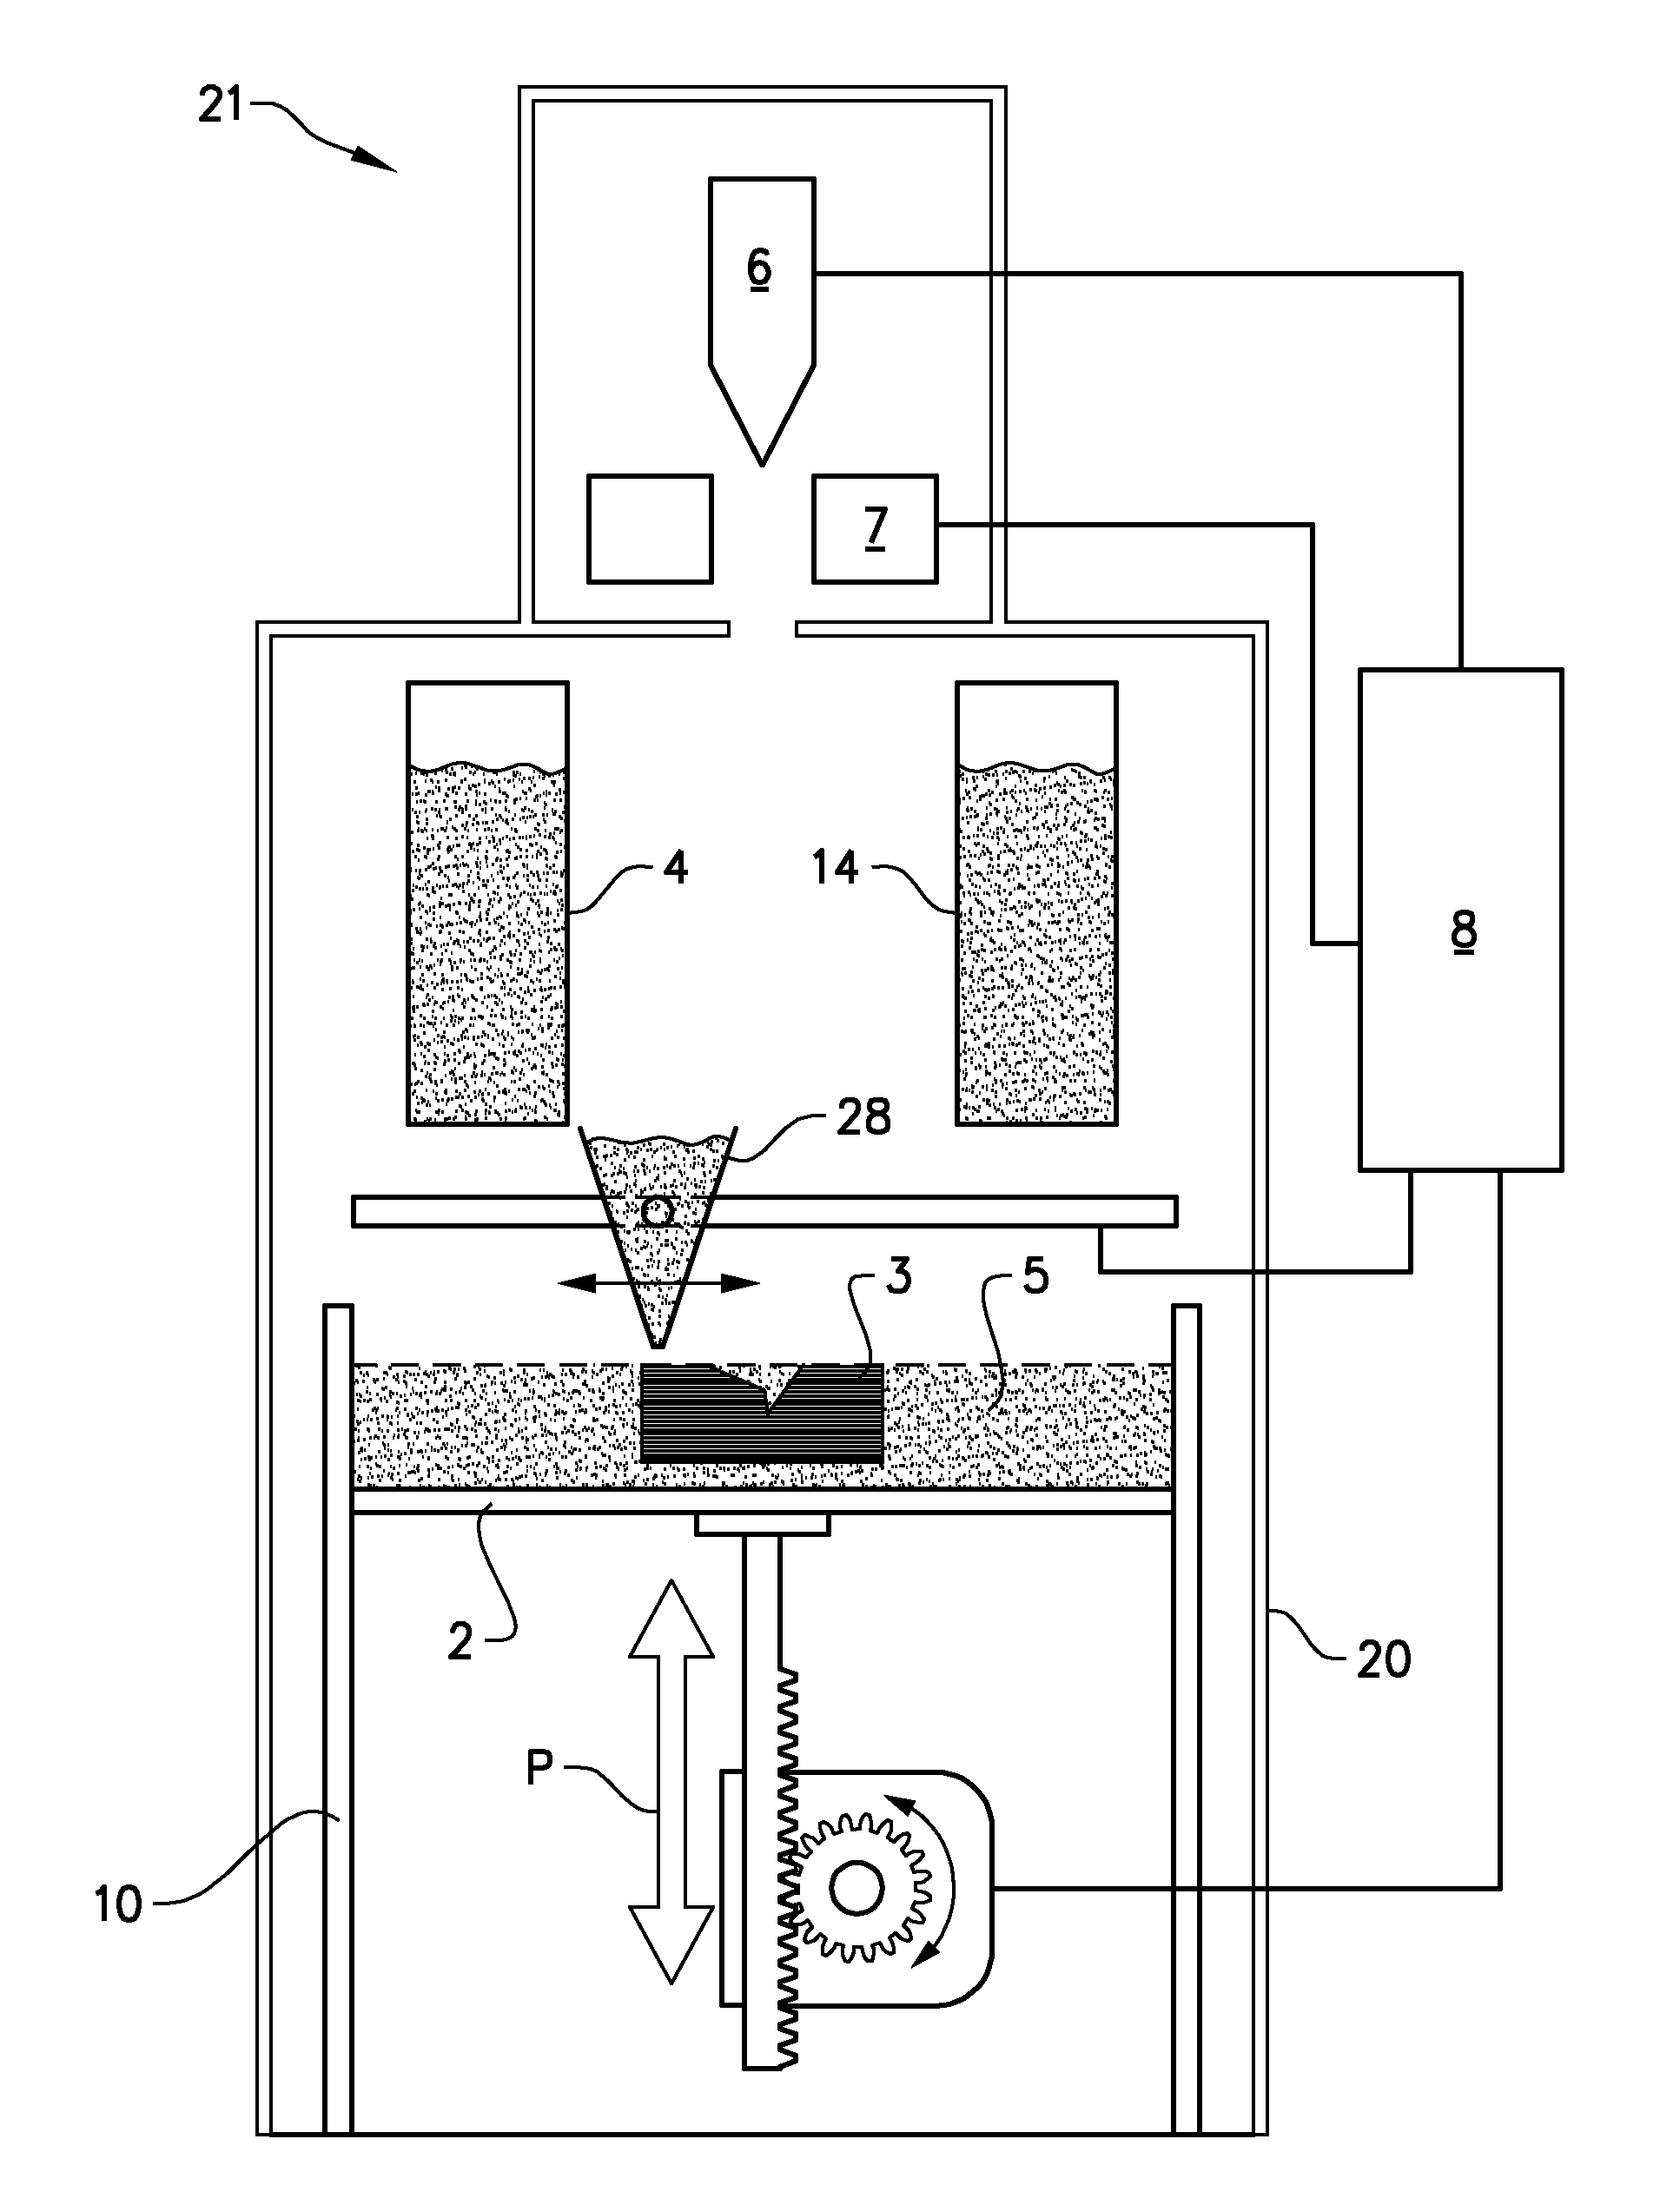 Powder distribution in additive manufacturing of three-dimensional articles